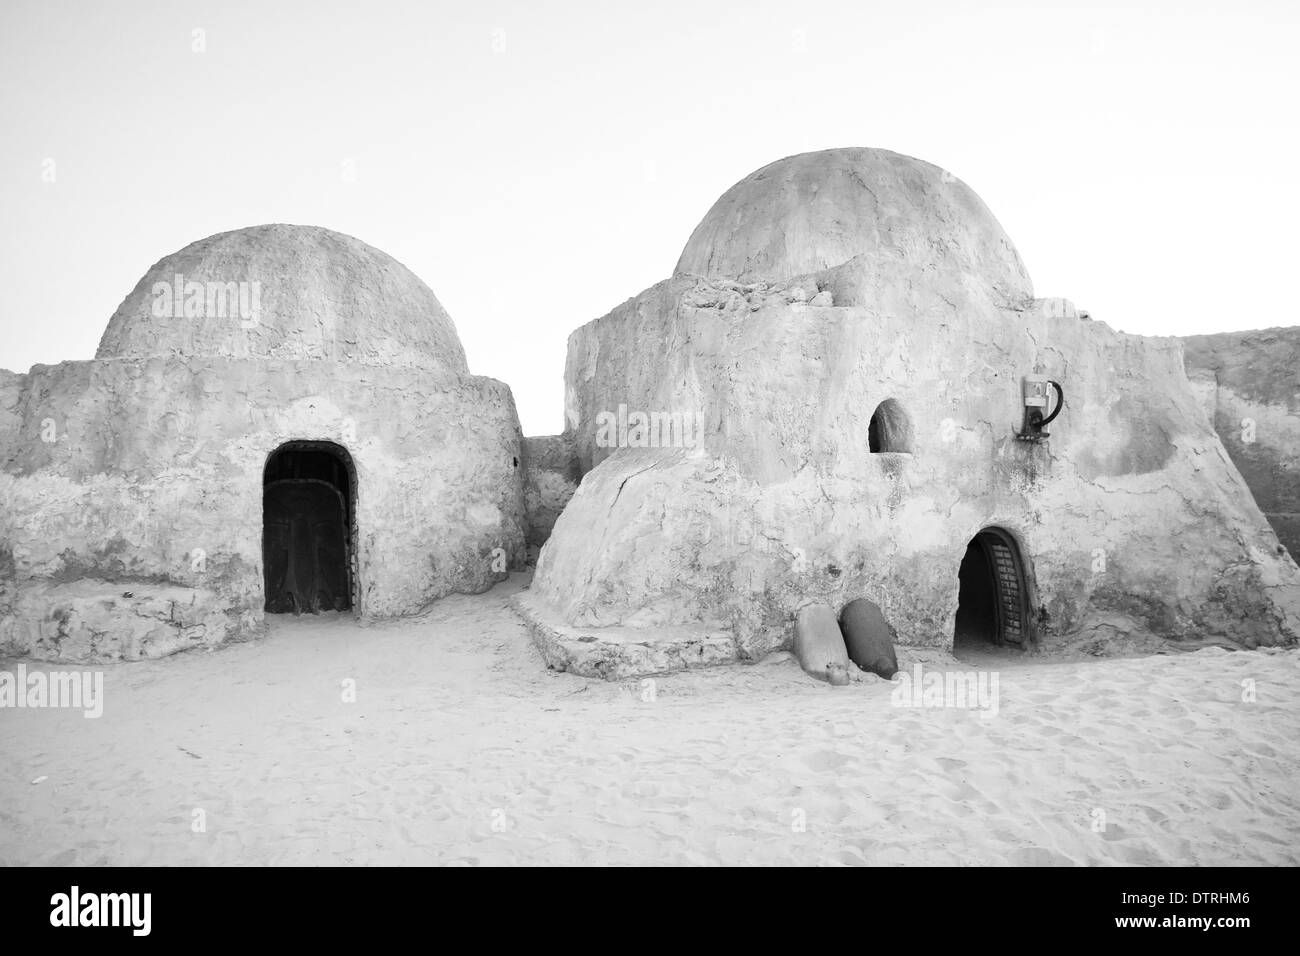 Buildings in Ong Jemel, Tunisia. Ong Jemel is a place near Tozeur, where the movies Star wars and the English Patient were filmed. Stock Photo